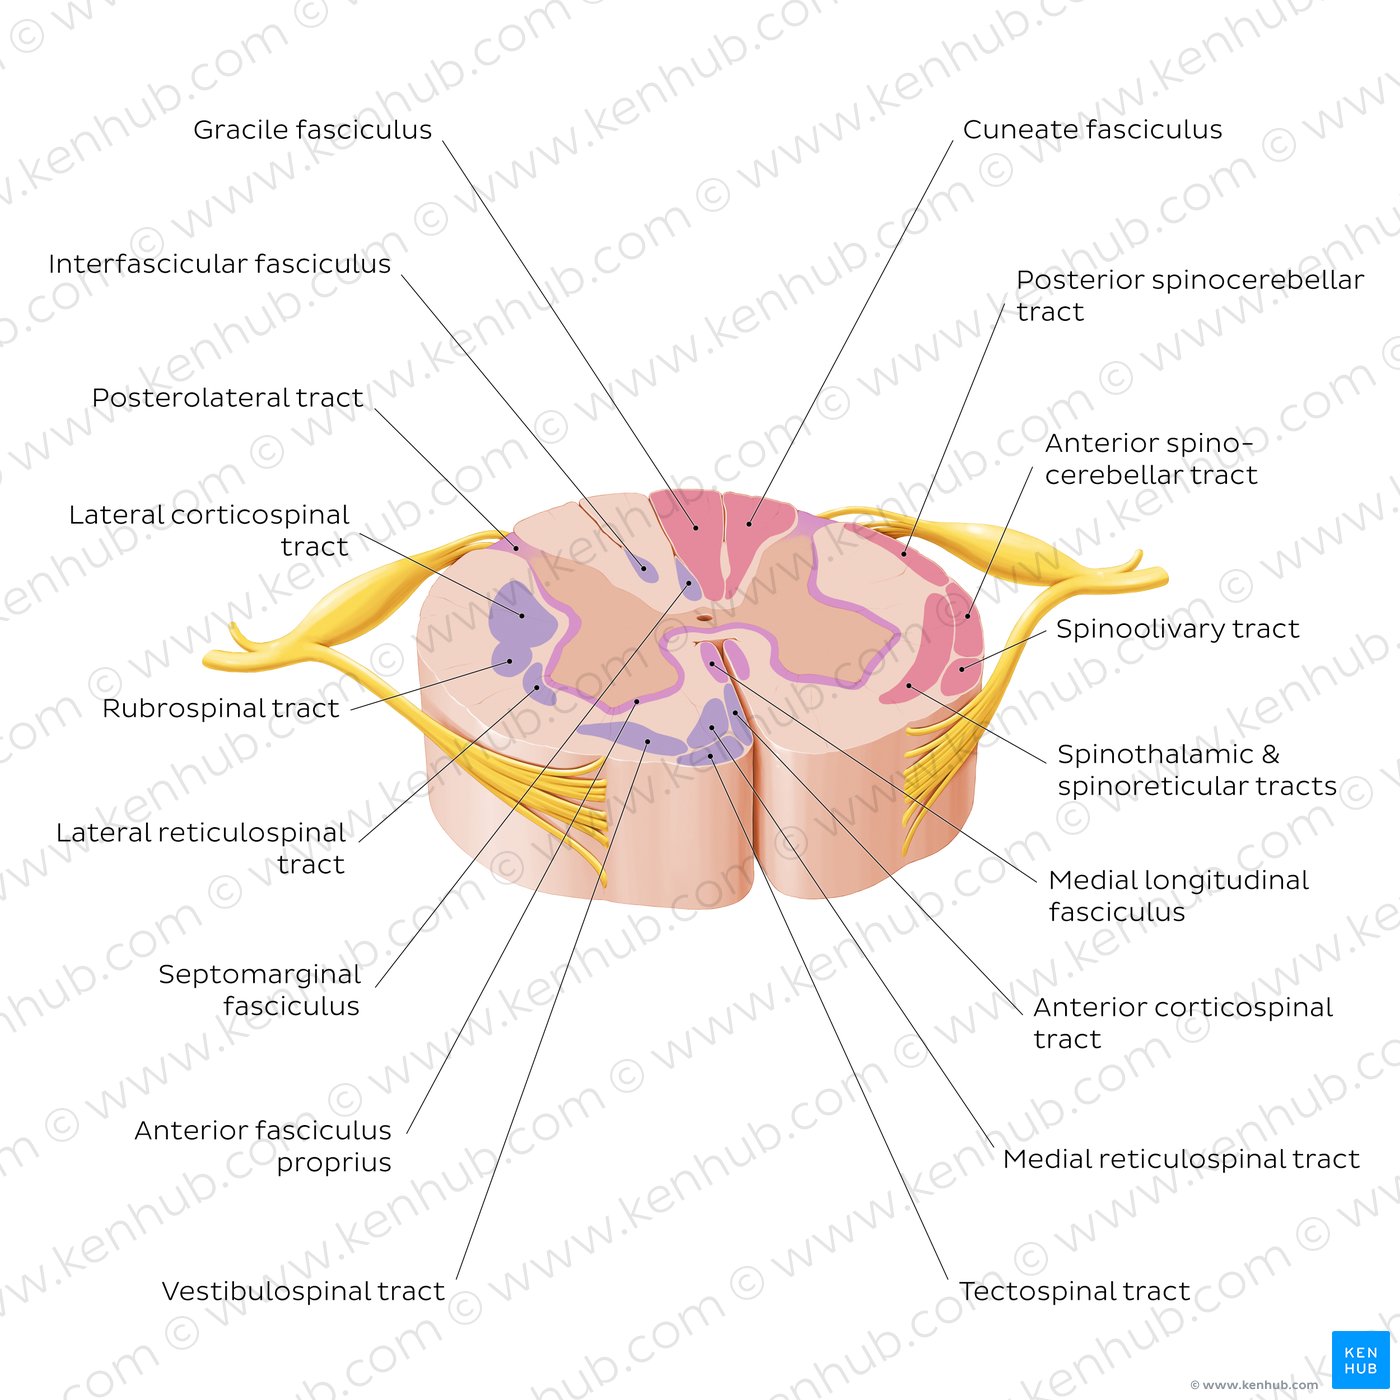 Spinal cord: Cross section (ascending and descending tracts)